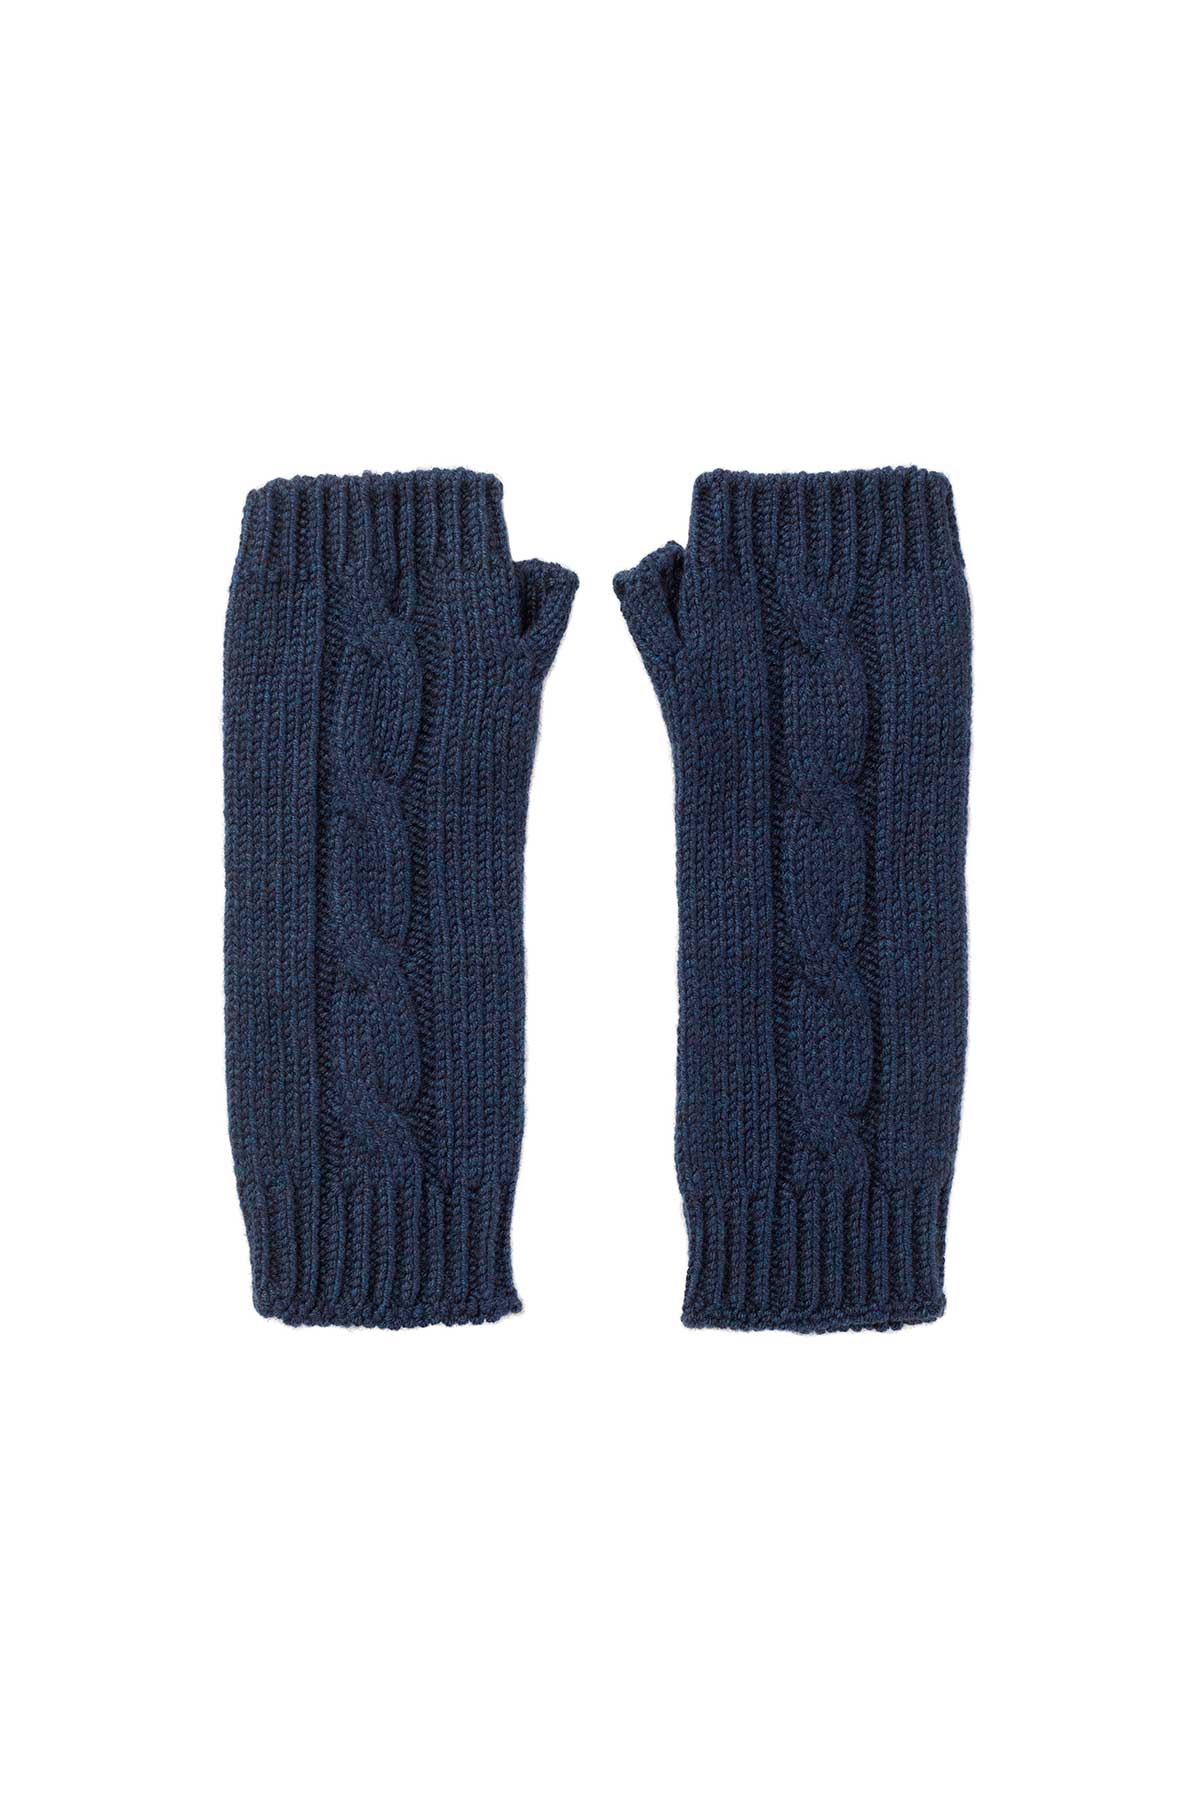 Johnstons of Elgin’s Ocean blue Cable Cashmere Wrist Warmers on a white background HAY03197HD7244